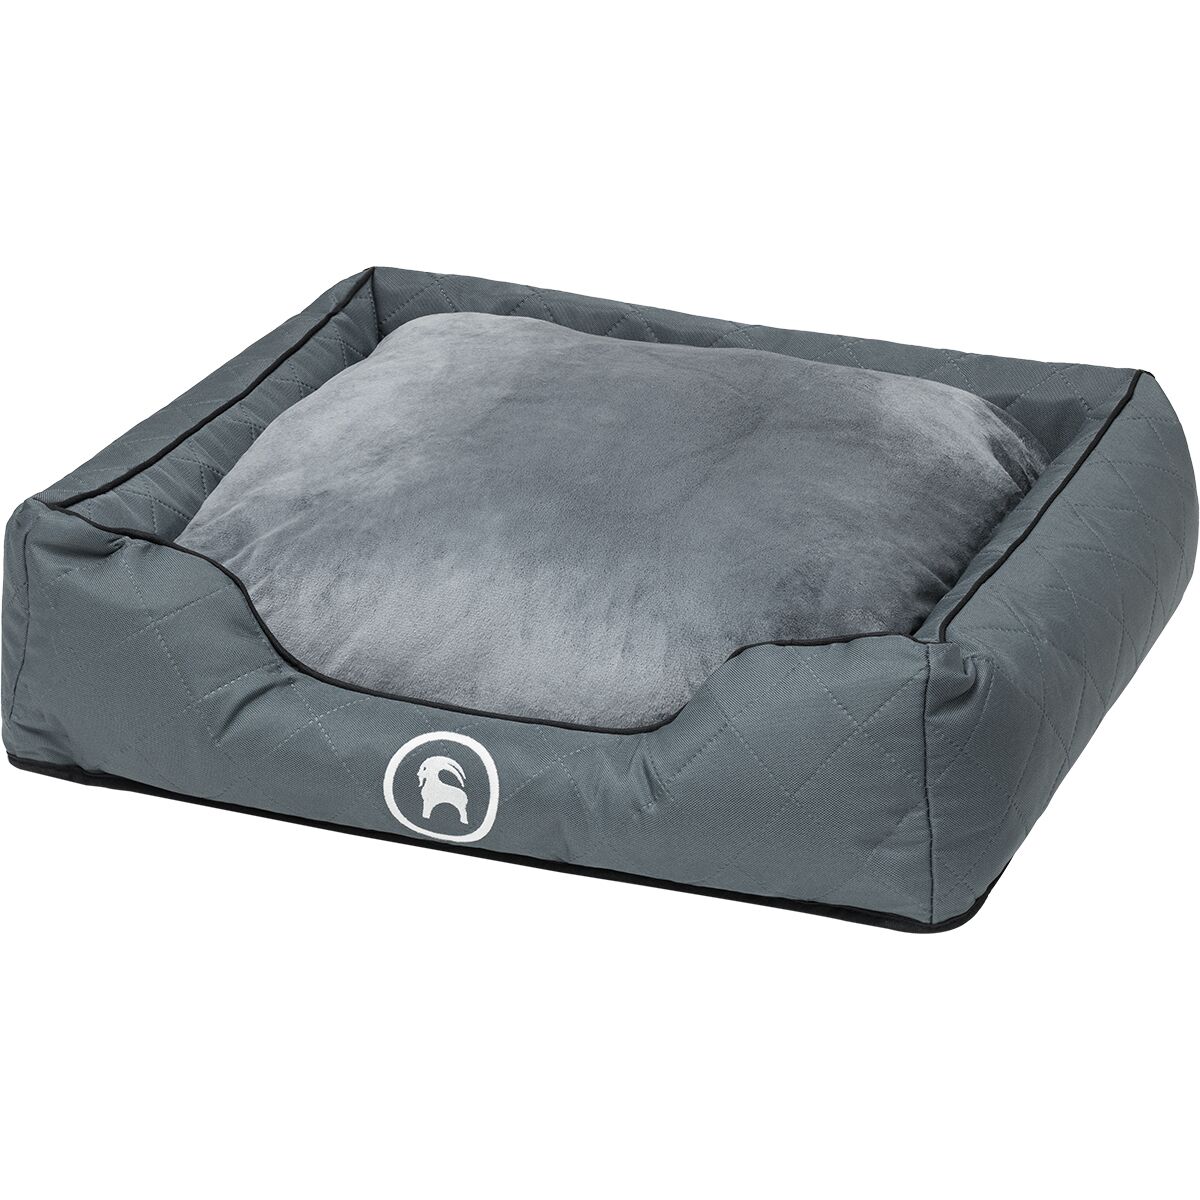 Backcountry x Petco The Bed Seat Cover